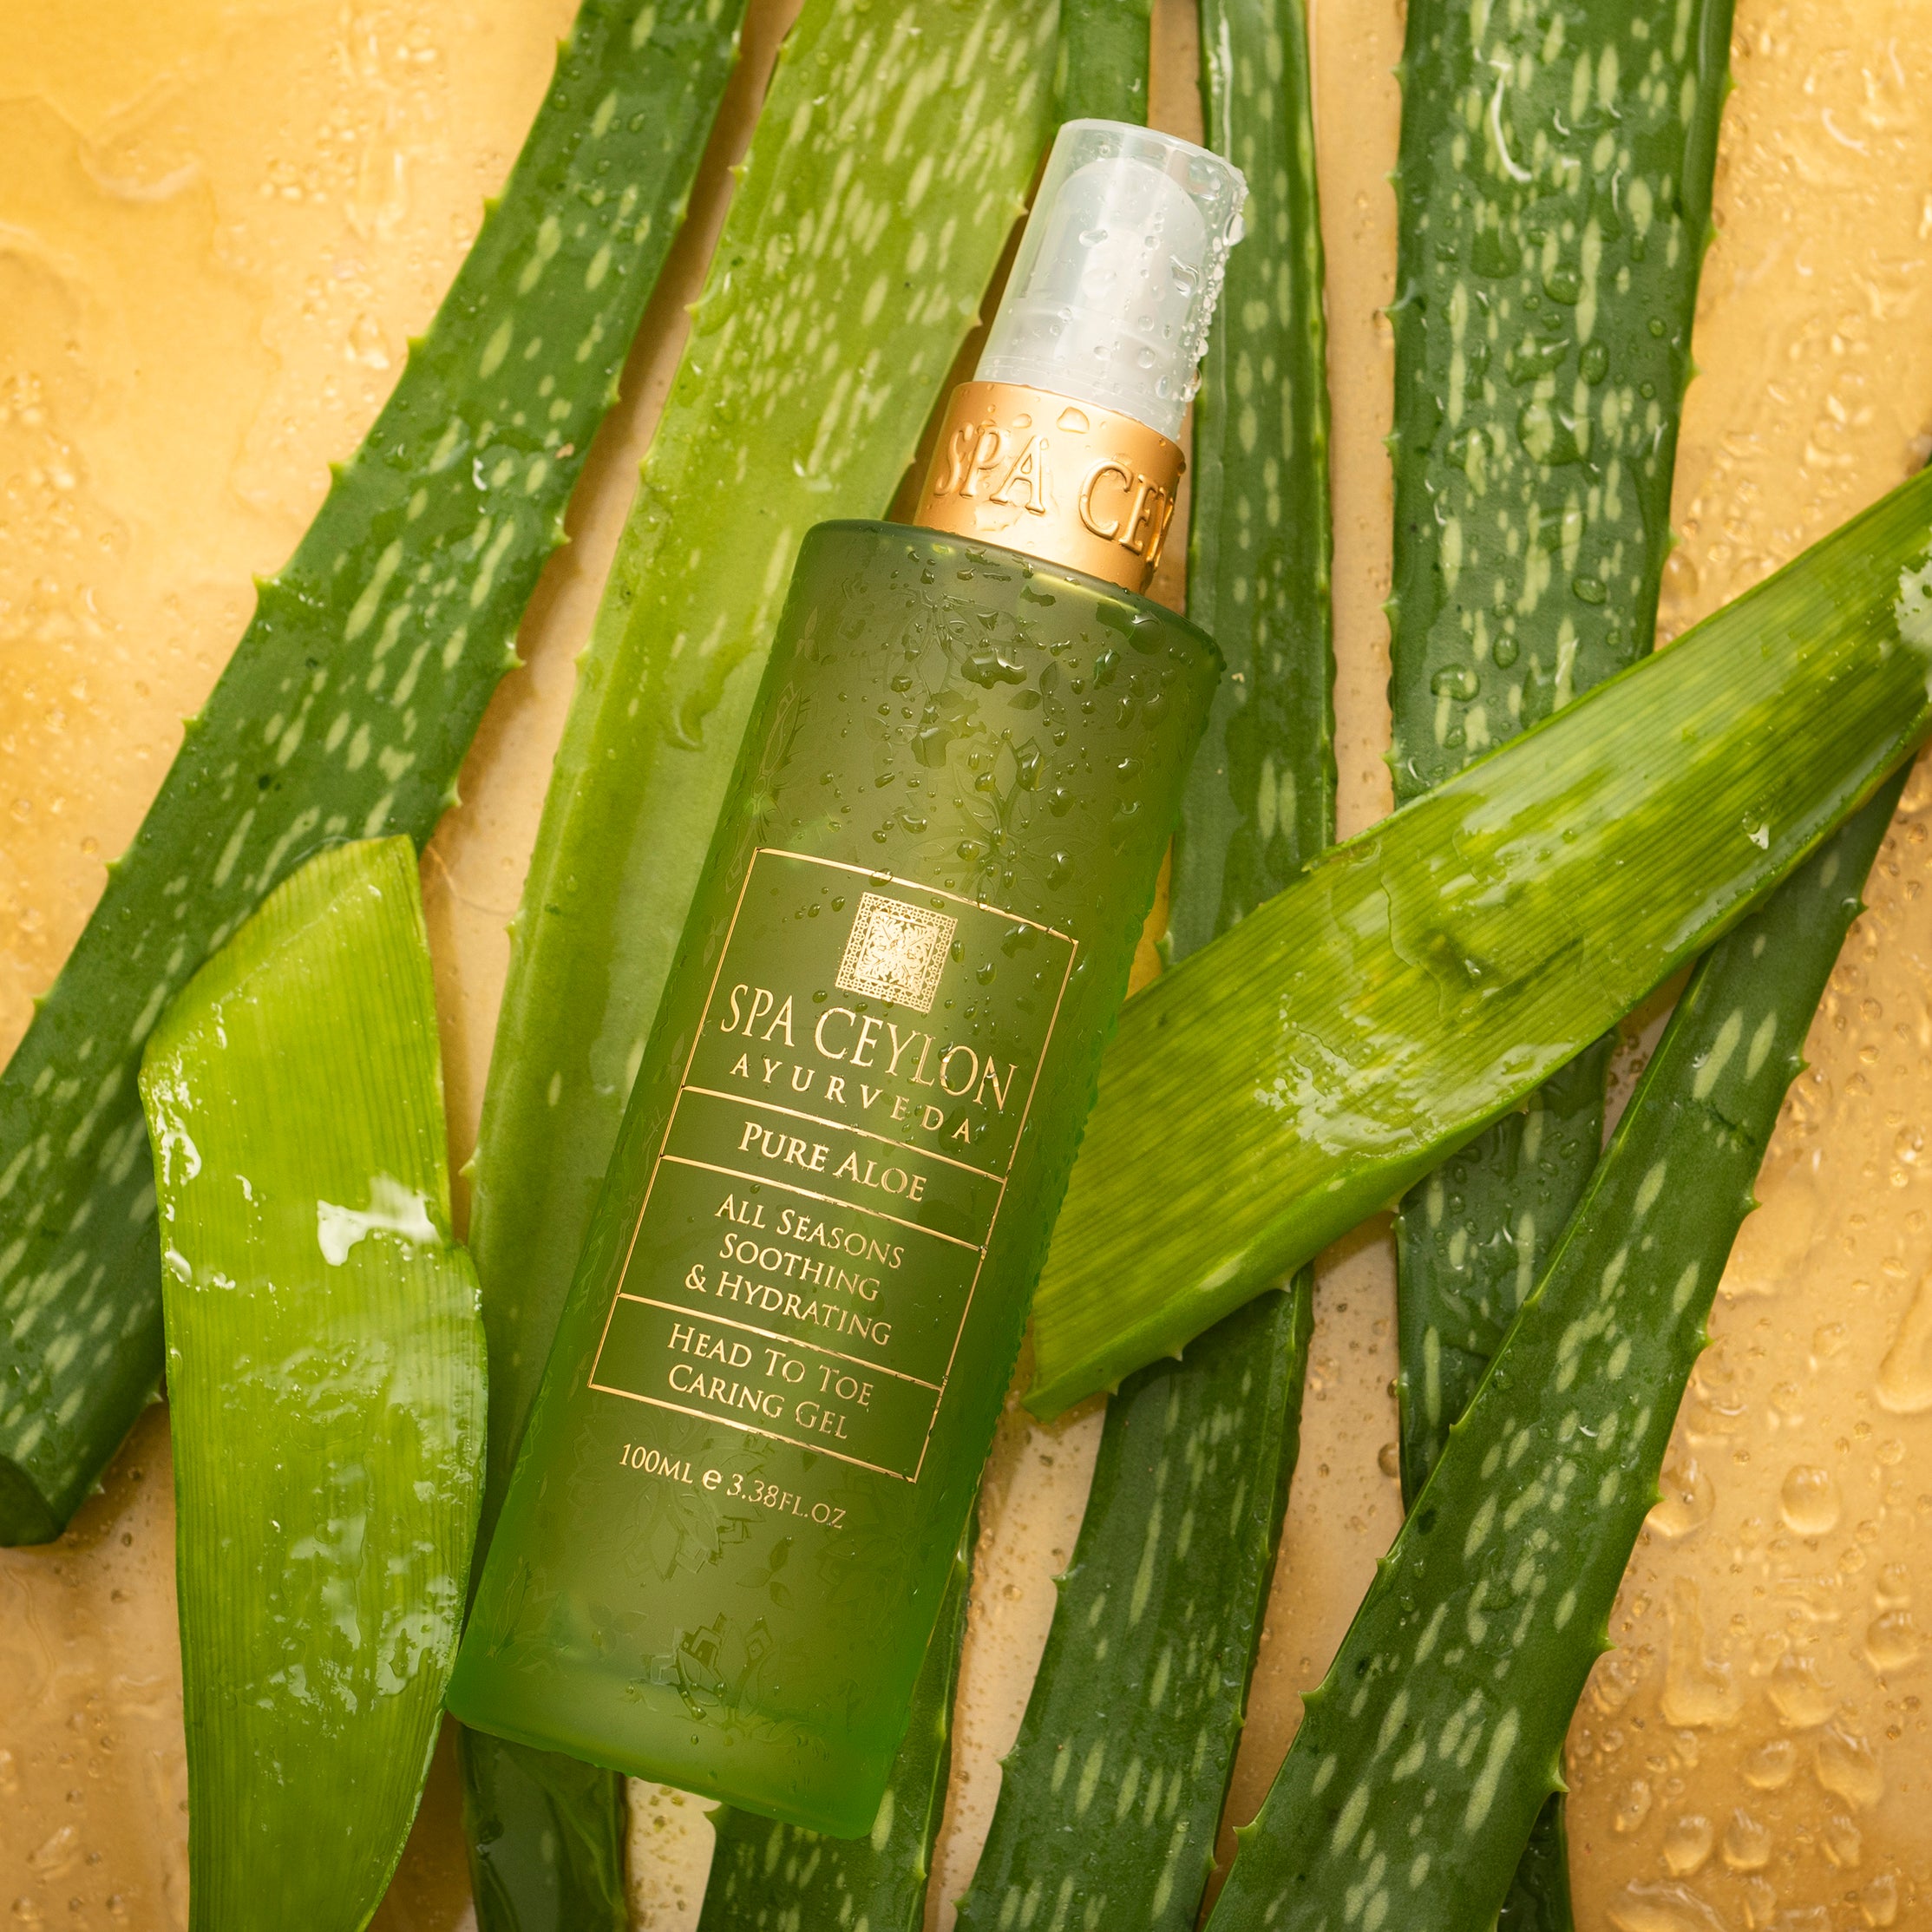 Pure Aloe - All Seasons - Soothing &amp; Hydrating Head To Toe Caring Gel